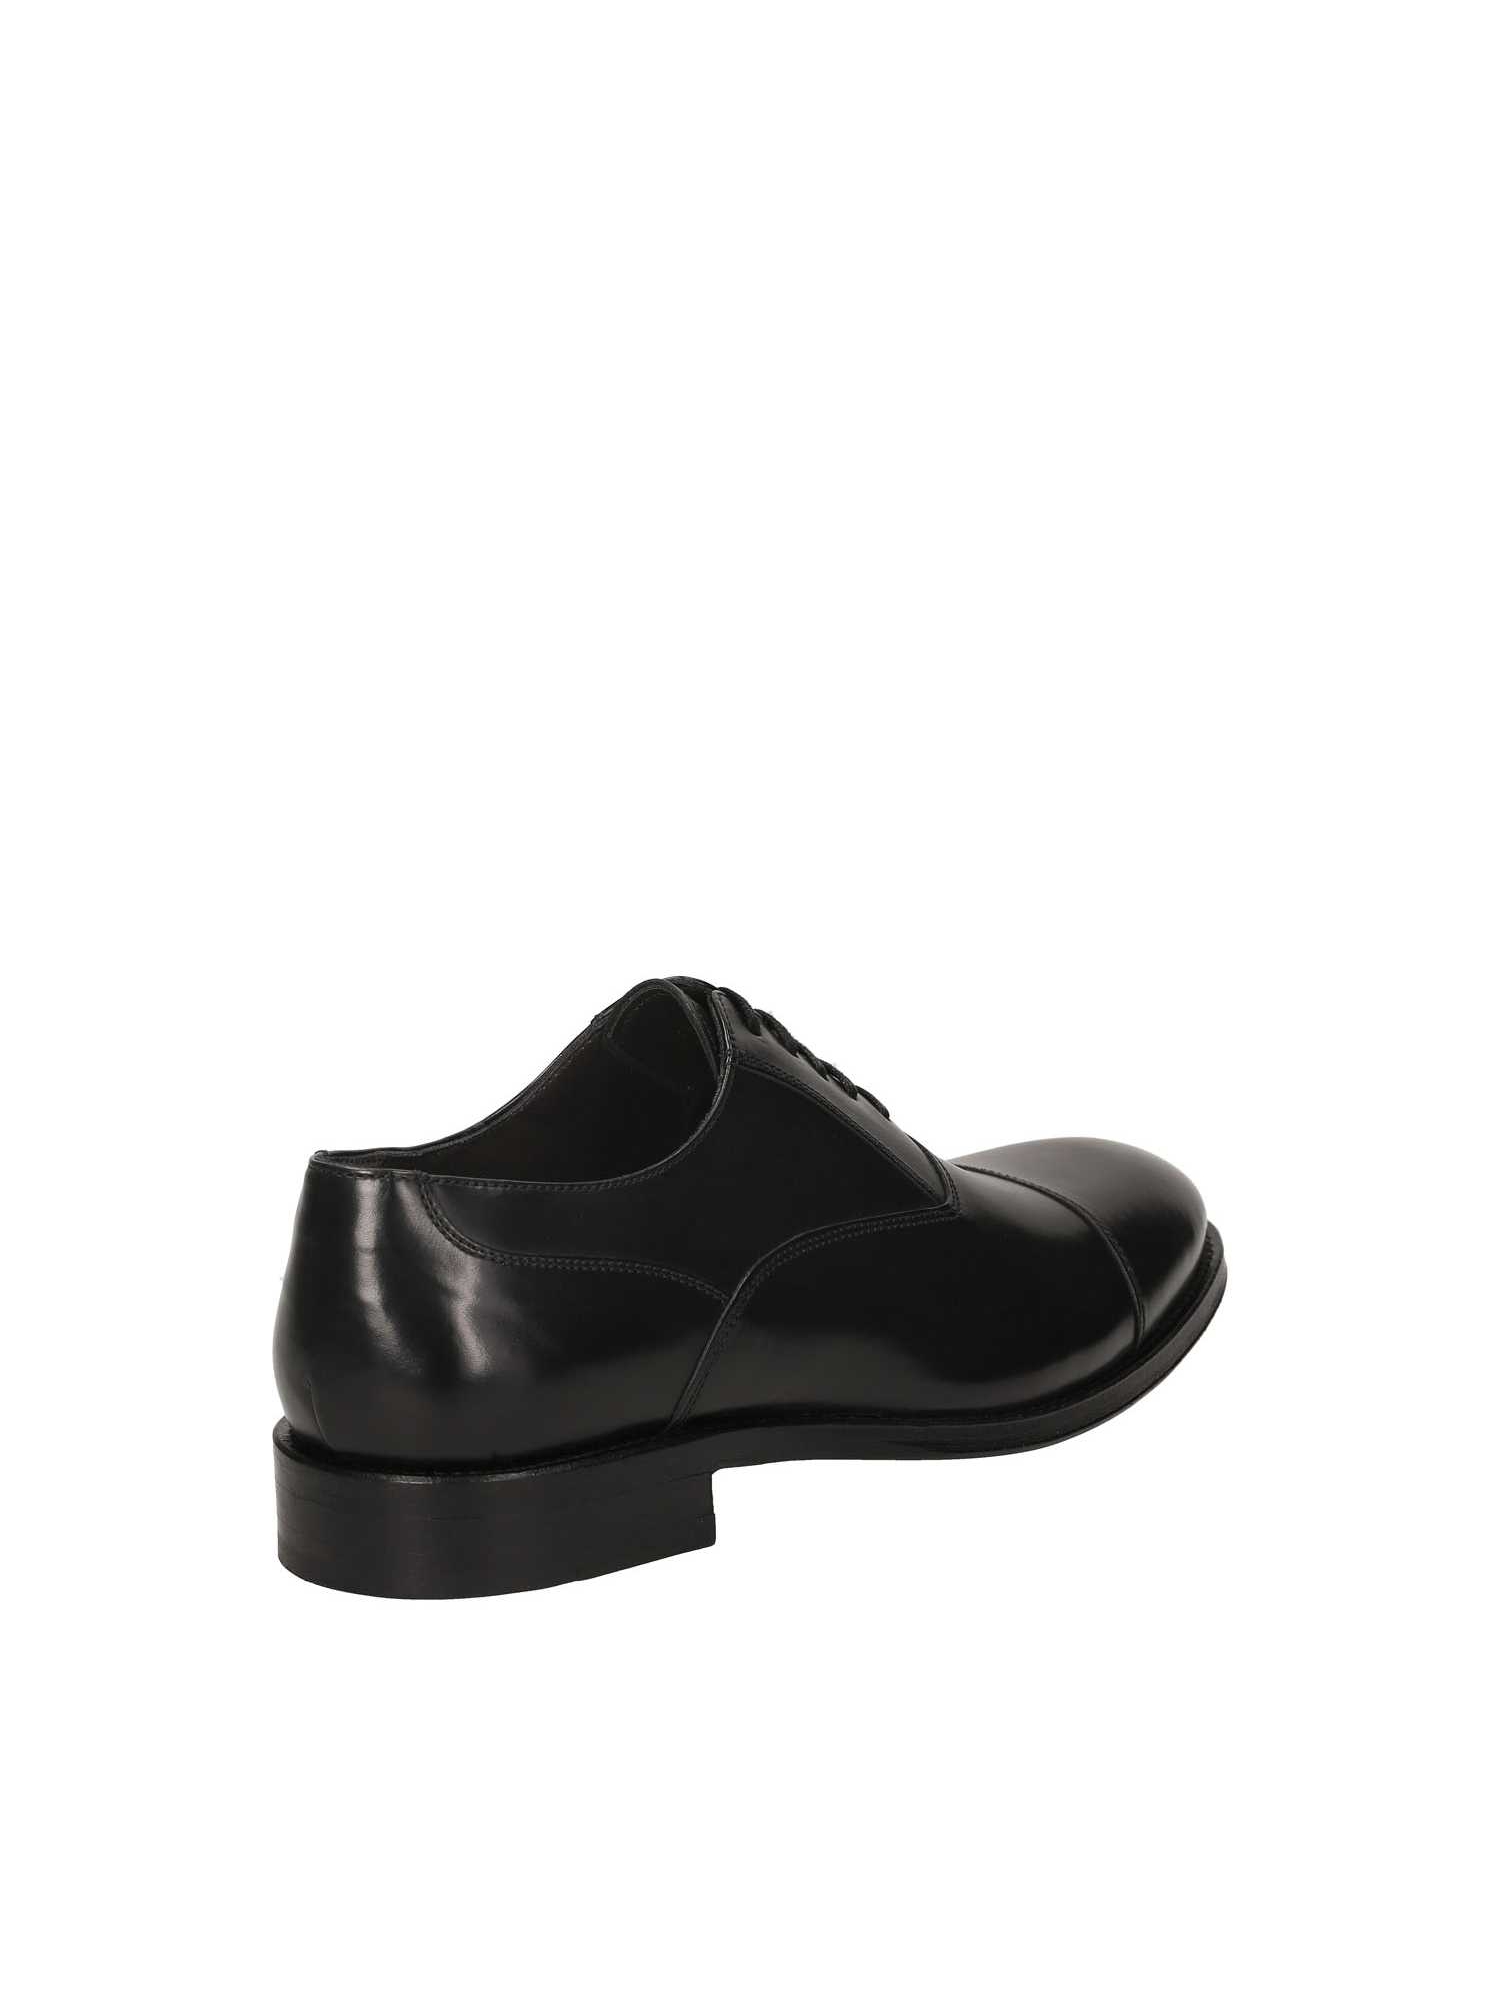 Black formal shoes LUCIANO